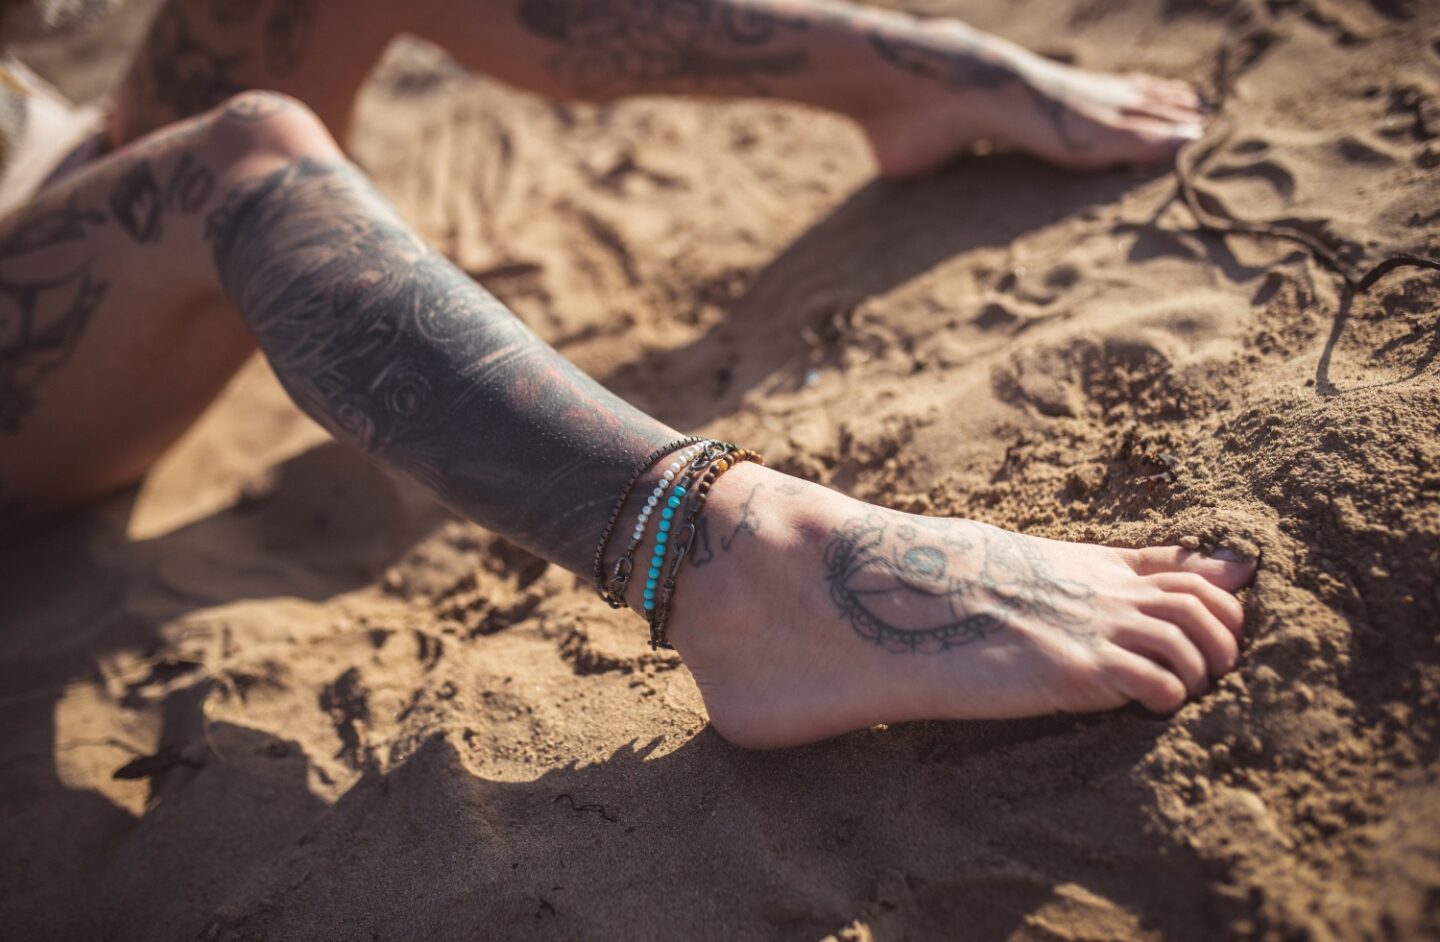 A picture of Marco Dal Maso Chain Link Jewellery on Eve used as an ankle bracelet on Troon beach.